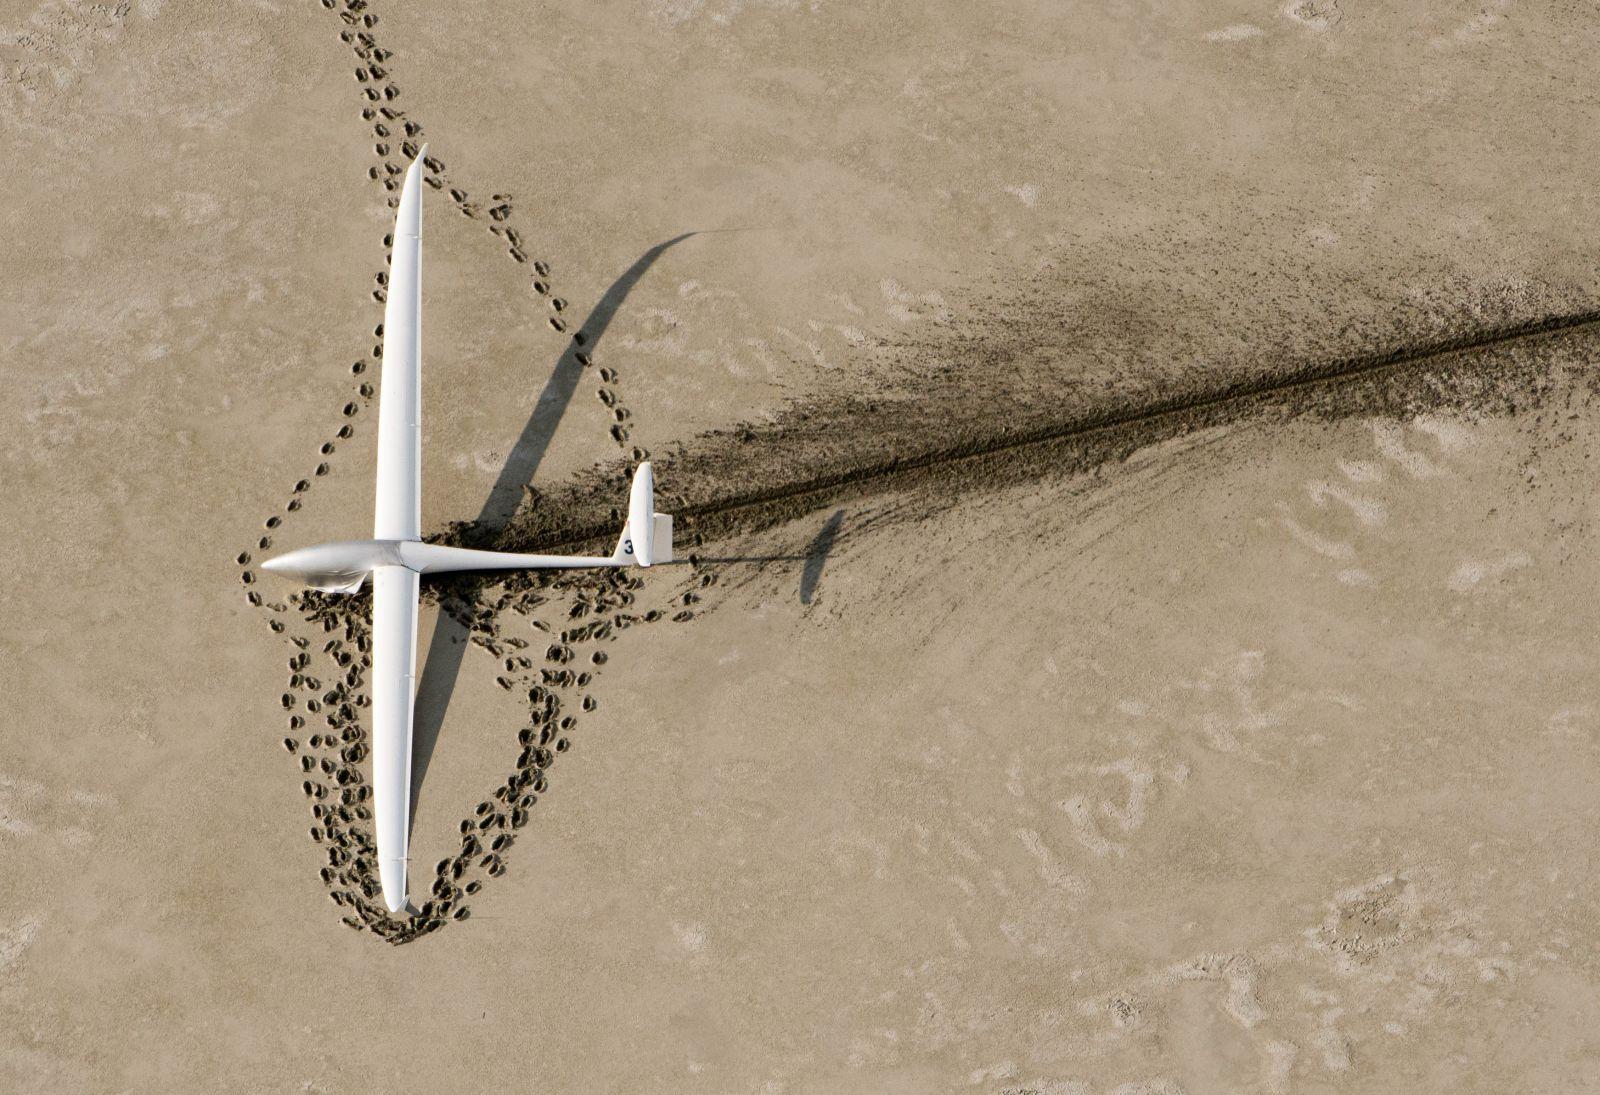 Glider that landed in a dry lake bed